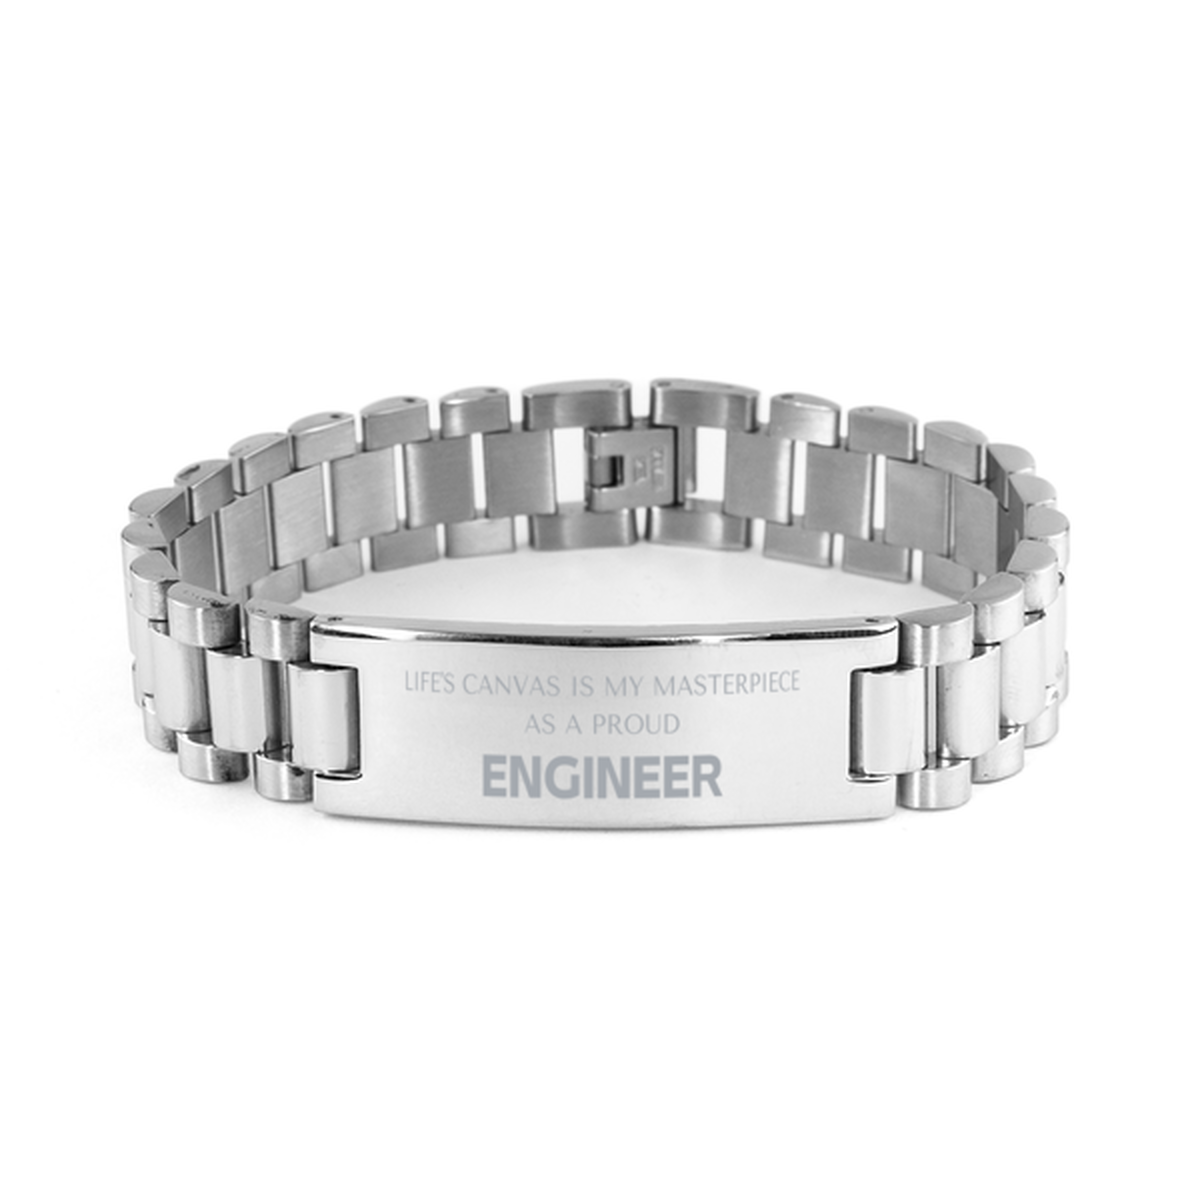 Proud Engineer Gifts, Life's canvas is my masterpiece, Epic Birthday Christmas Unique Ladder Stainless Steel Bracelet For Engineer, Coworkers, Men, Women, Friends